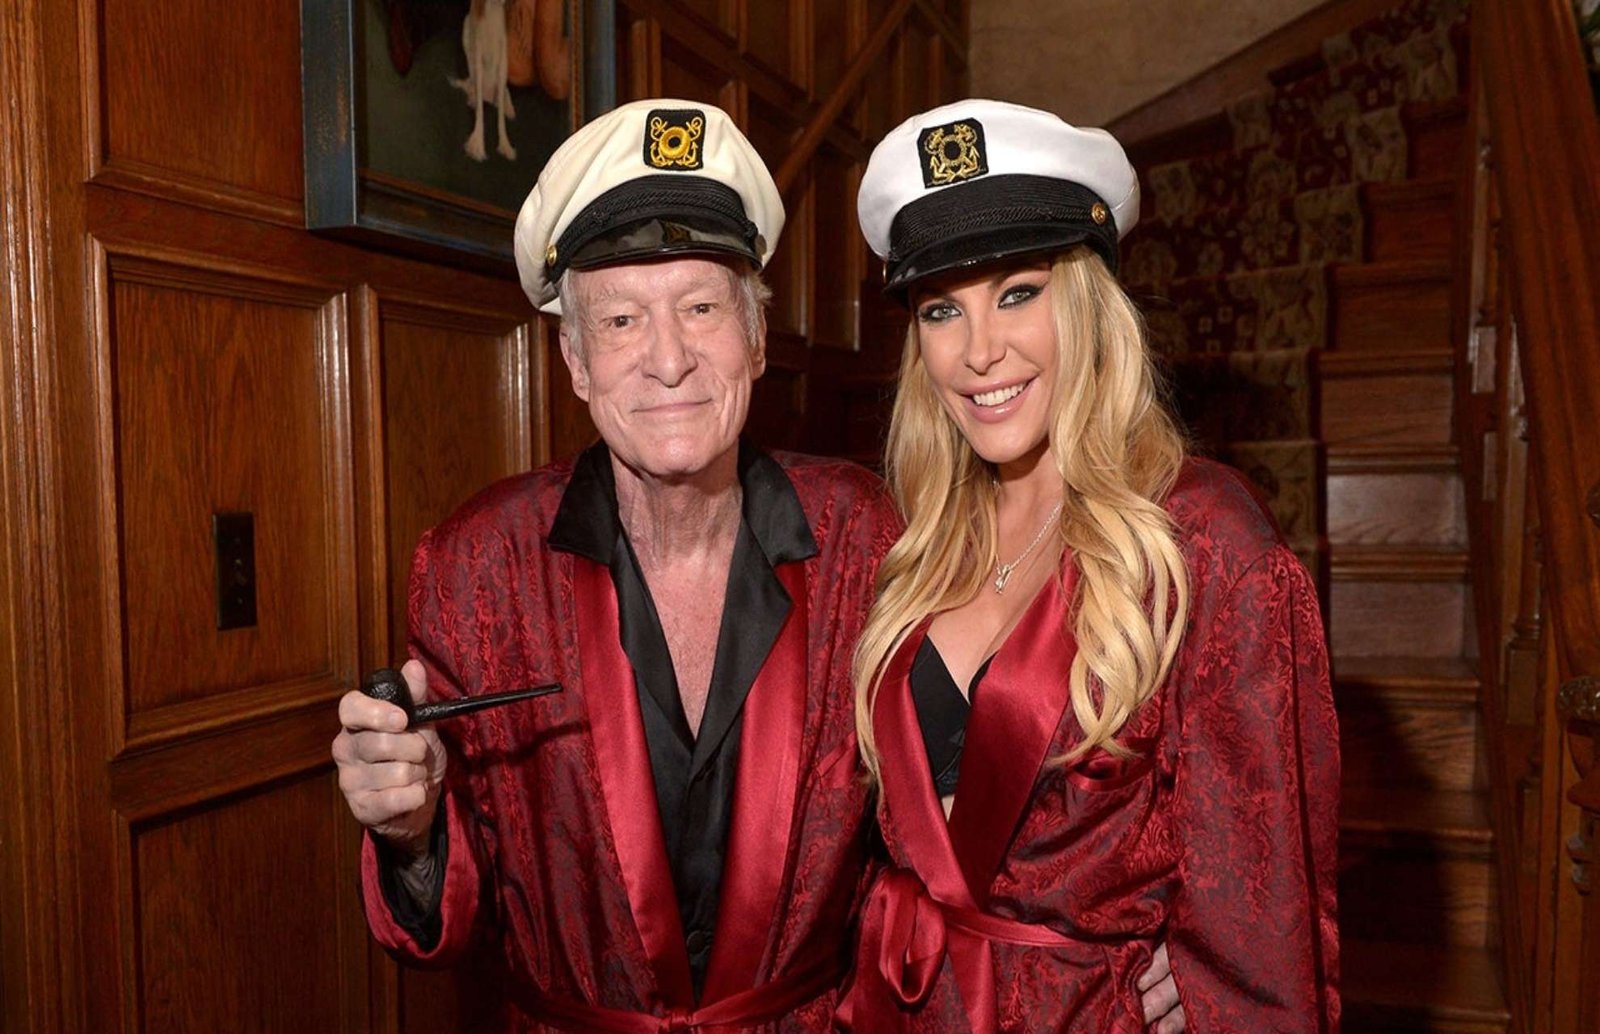 https://jaleebinews.com/crystal-hefners-memoir-sheds-light-on-challenges-at-playboy-mansion-unveiling-truths-of-an-iconic-legacy/